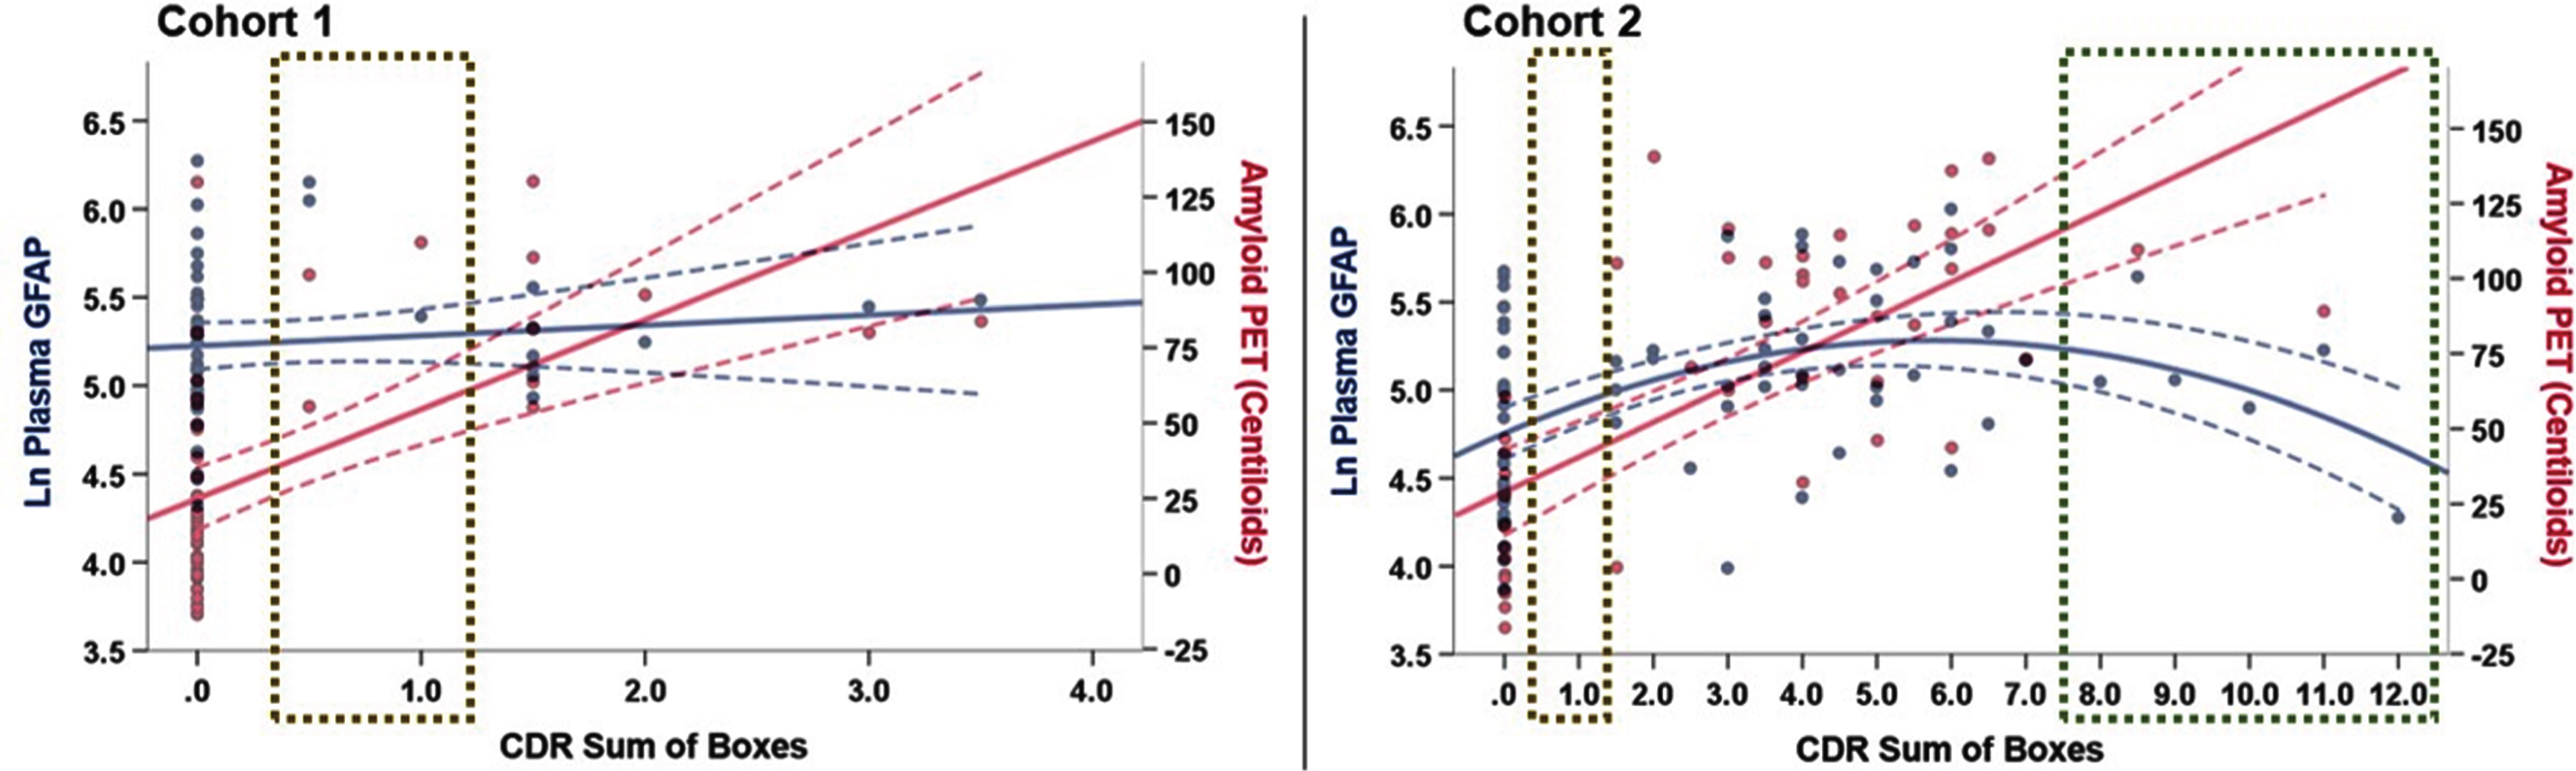 Plots depicting plasma GFAP (blue) and A β -PET (red) as a function of CDR-SB score. In Cohort 1, plasma GFAP was not significantly associated with CDR-SB after controlling for age and sex (β=.189, p = .16). In Cohort 2, we observed potential divergence of plasma GFAP and Aβ-PET in the in older adults with CDR-SB>8.0, though the Aβ-PET data in this CDR-SB range largely was extrapolated (green box). Cohorts notably differed in representation of older adults with CDR-SB>4.0 (N = 0 in Cohort 1) and in the mildest clinical disease stage (CDR-SB=0.5-1.0; gold boxes). NOTE: An additional 38 older adults from Cohort 2 with available plasma GFAP and CDR-SB (without Aβ-PET scan) were included in this plot to better represent the spectrum of clinical disease stage, particularly in the dementia range (total N = 75, age = 71.9±9.1 years old, 52%female,17.2±3.0 years of education, 91.5%white).